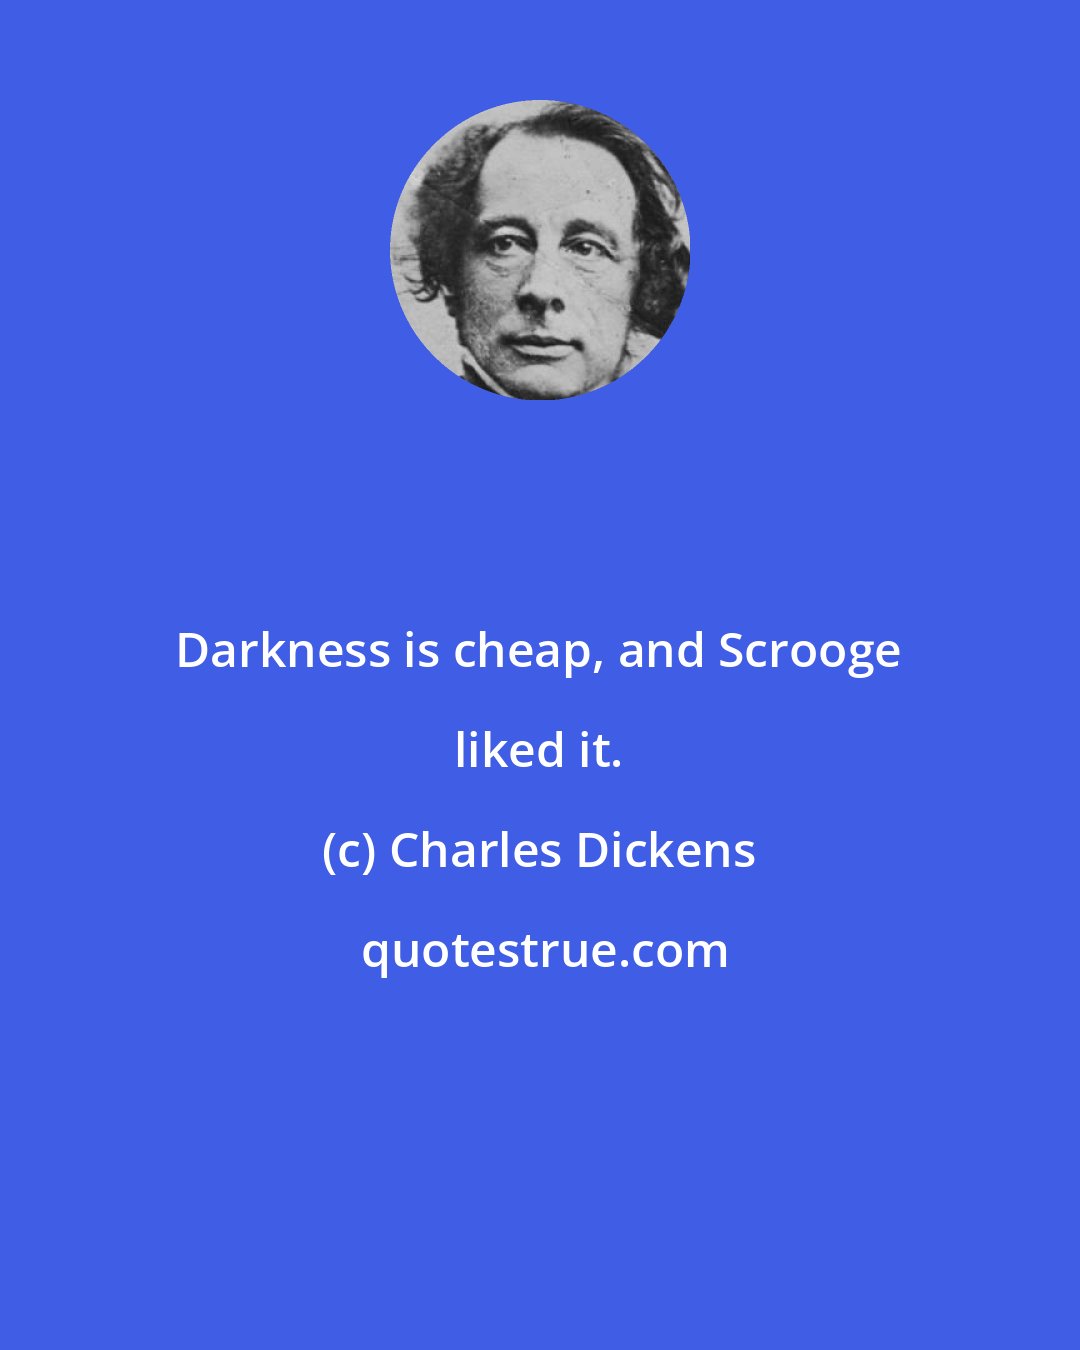 Charles Dickens: Darkness is cheap, and Scrooge liked it.